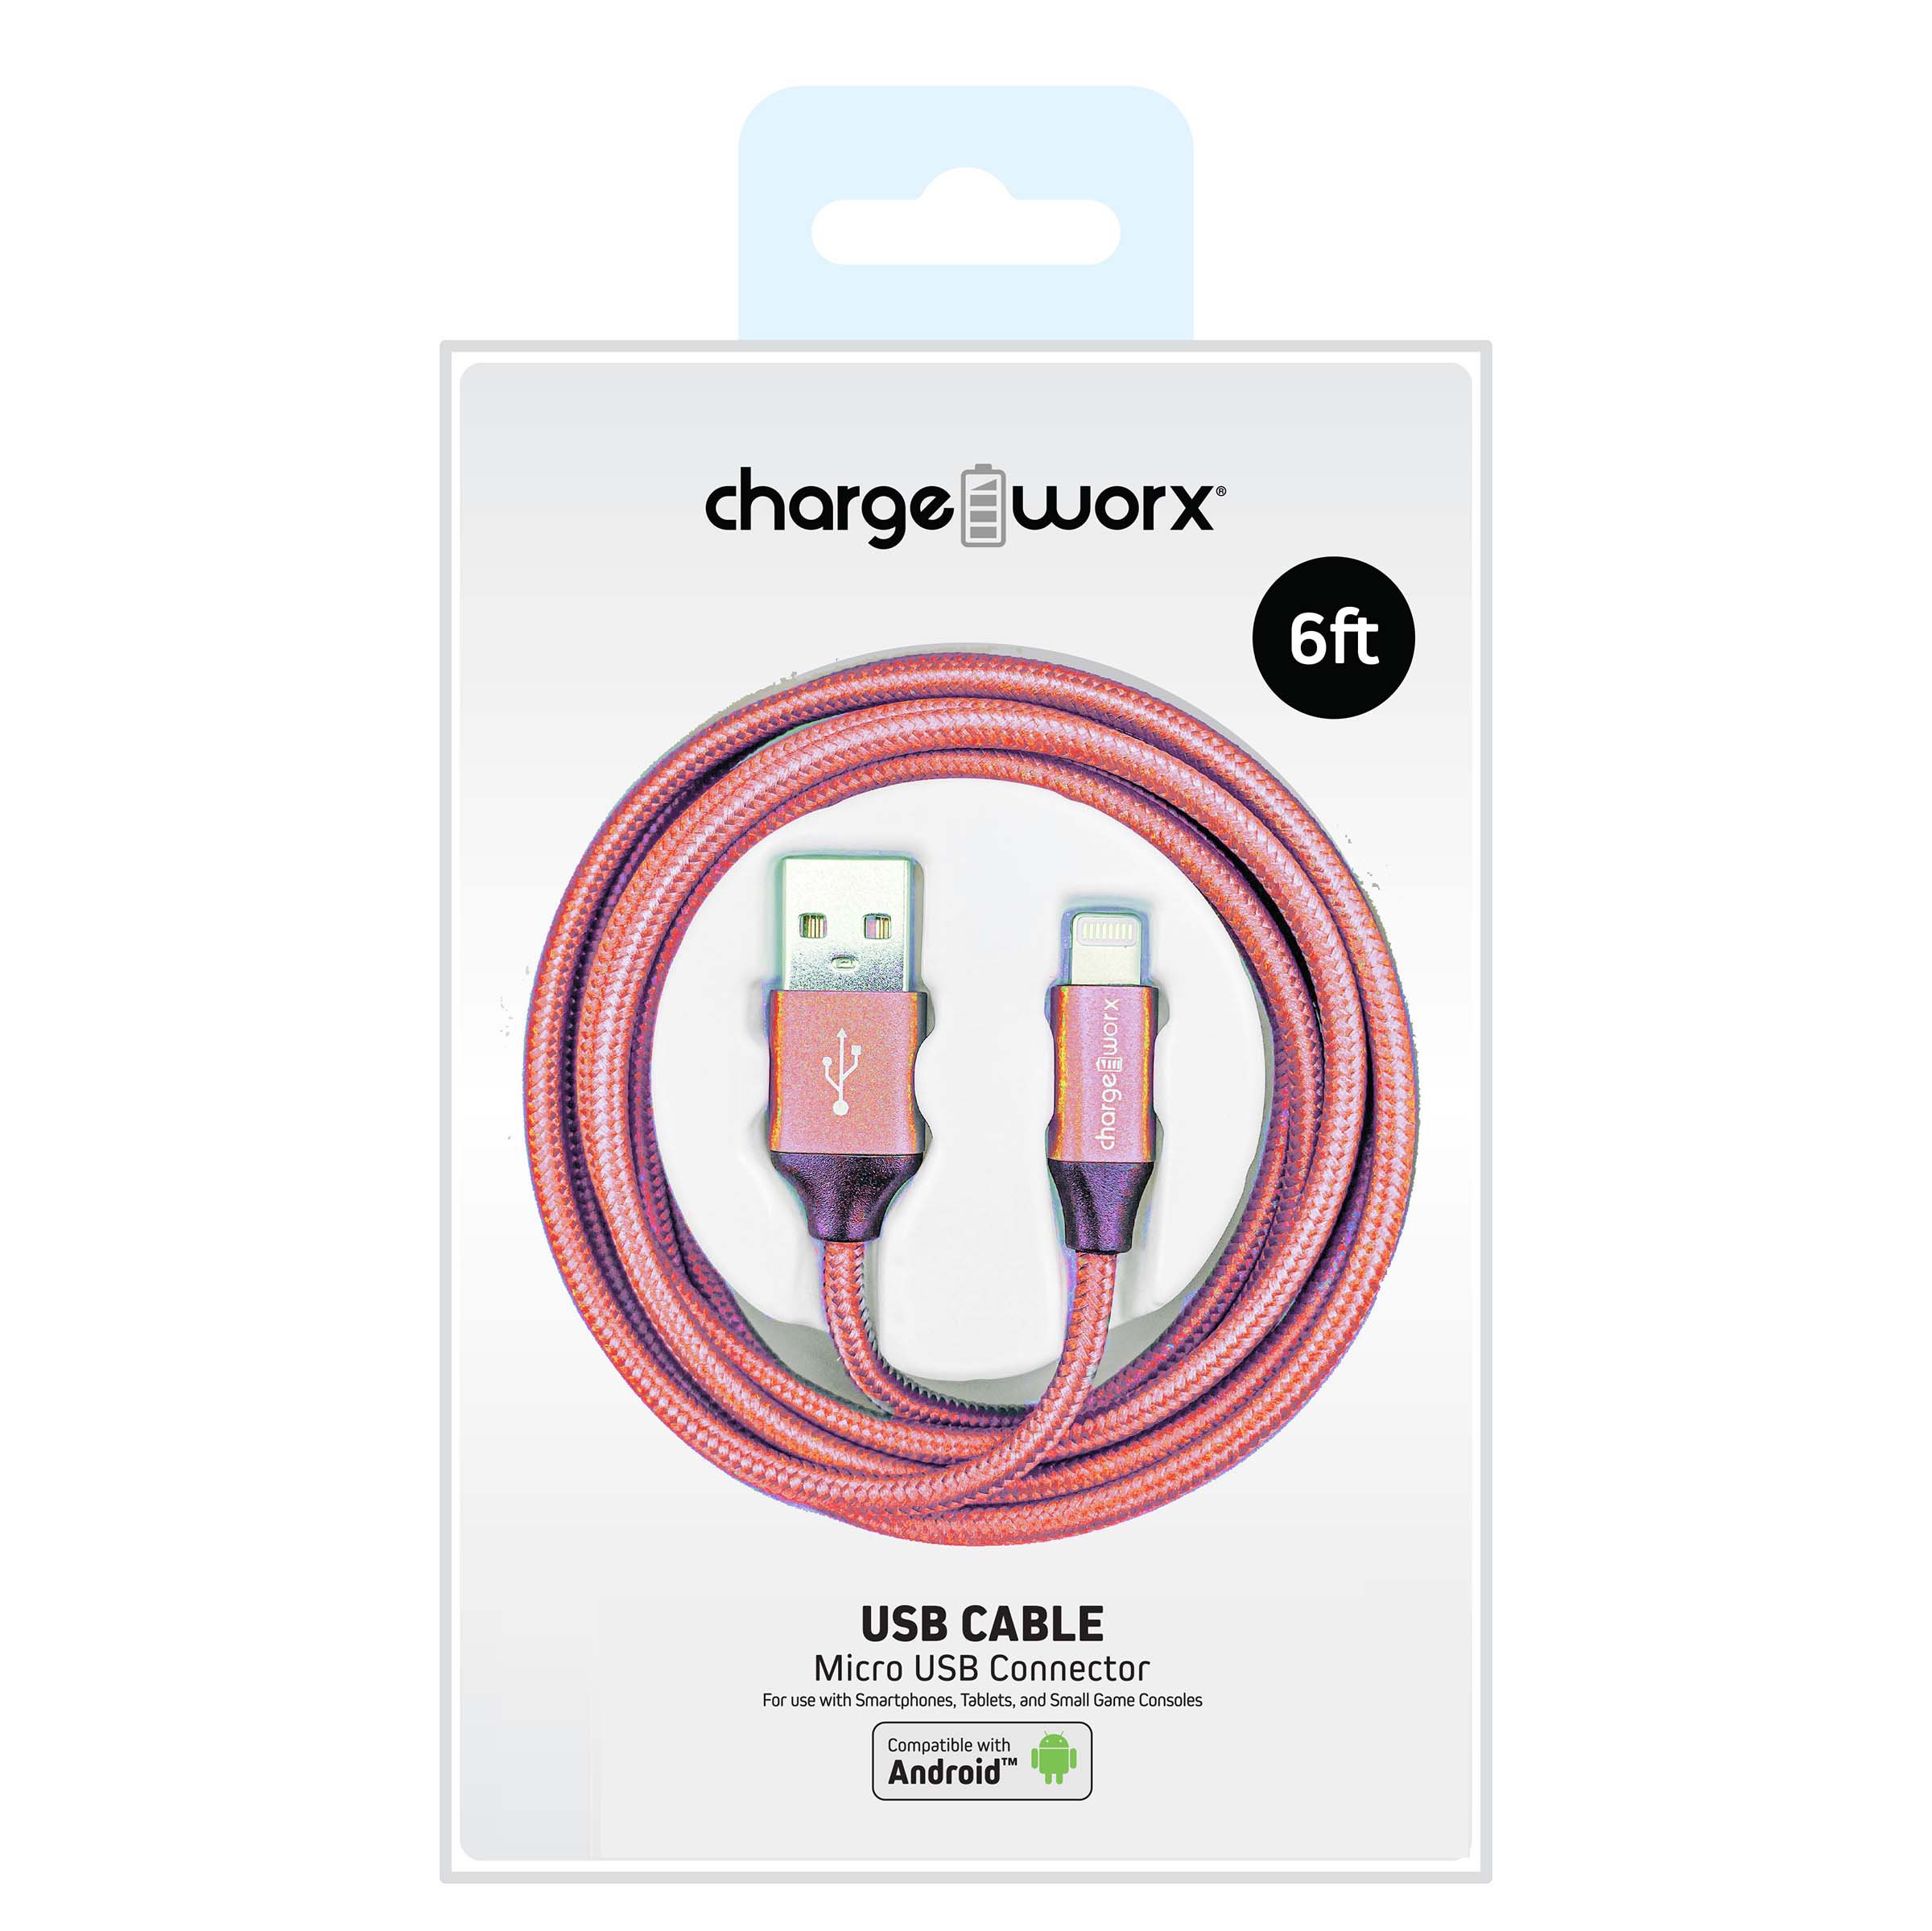 ChargeWorx Micro USB Connector Cable - Shop Connection at H-E-B